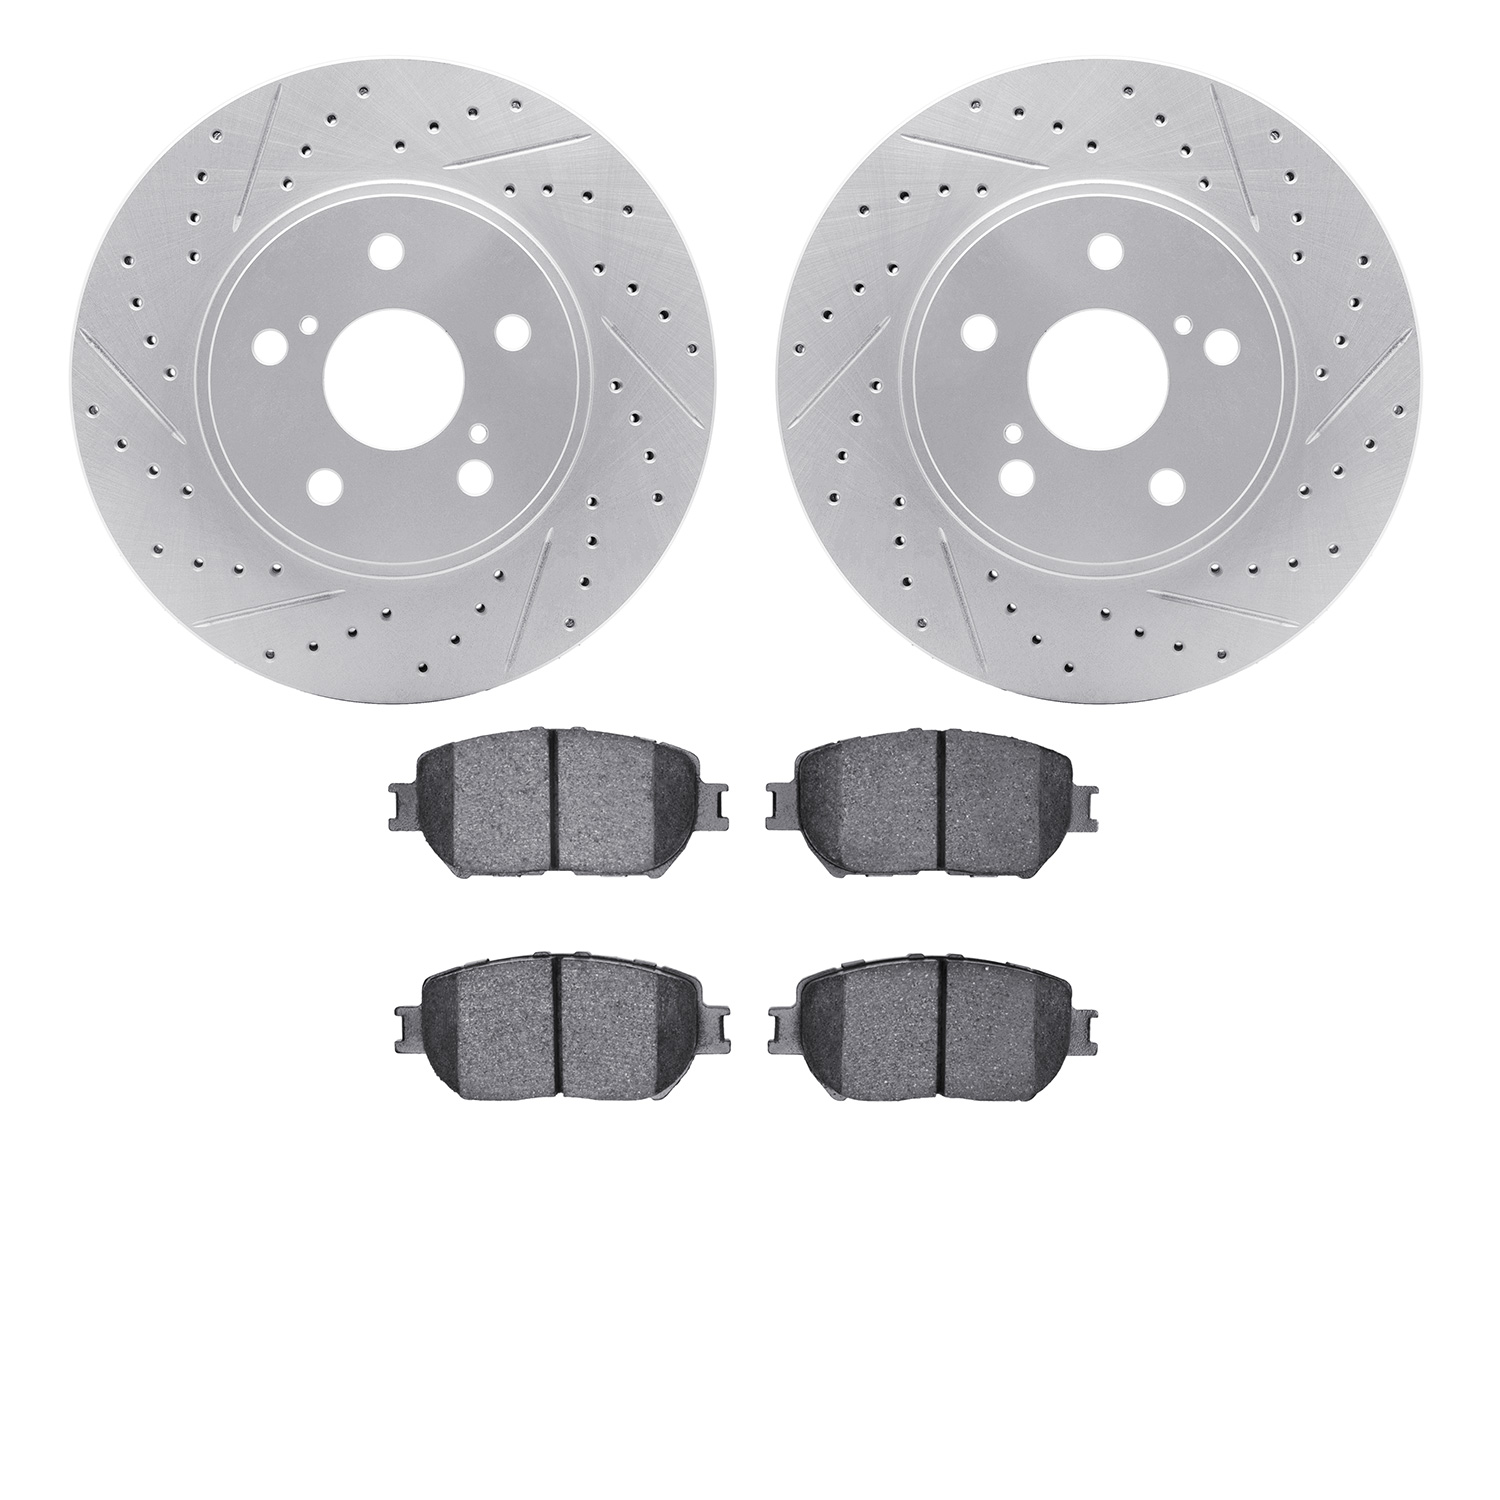 2502-76026 Geoperformance Drilled/Slotted Rotors w/5000 Advanced Brake Pads Kit, 2002-2003 Lexus/Toyota/Scion, Position: Front